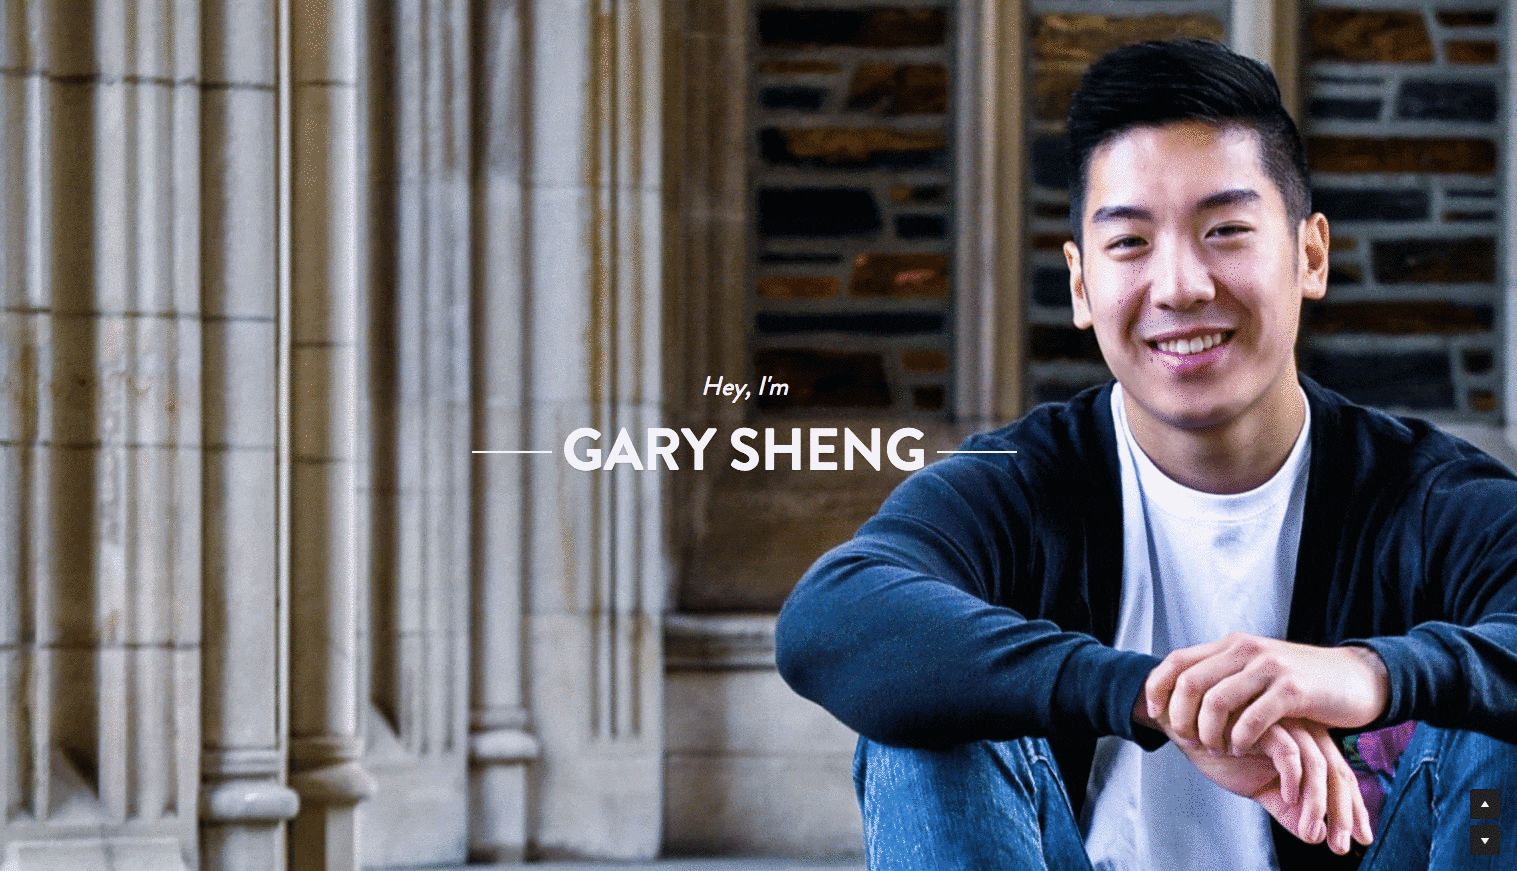 Personal website of Gary Sheng with a picture of him on the homepage followed by details of his resume